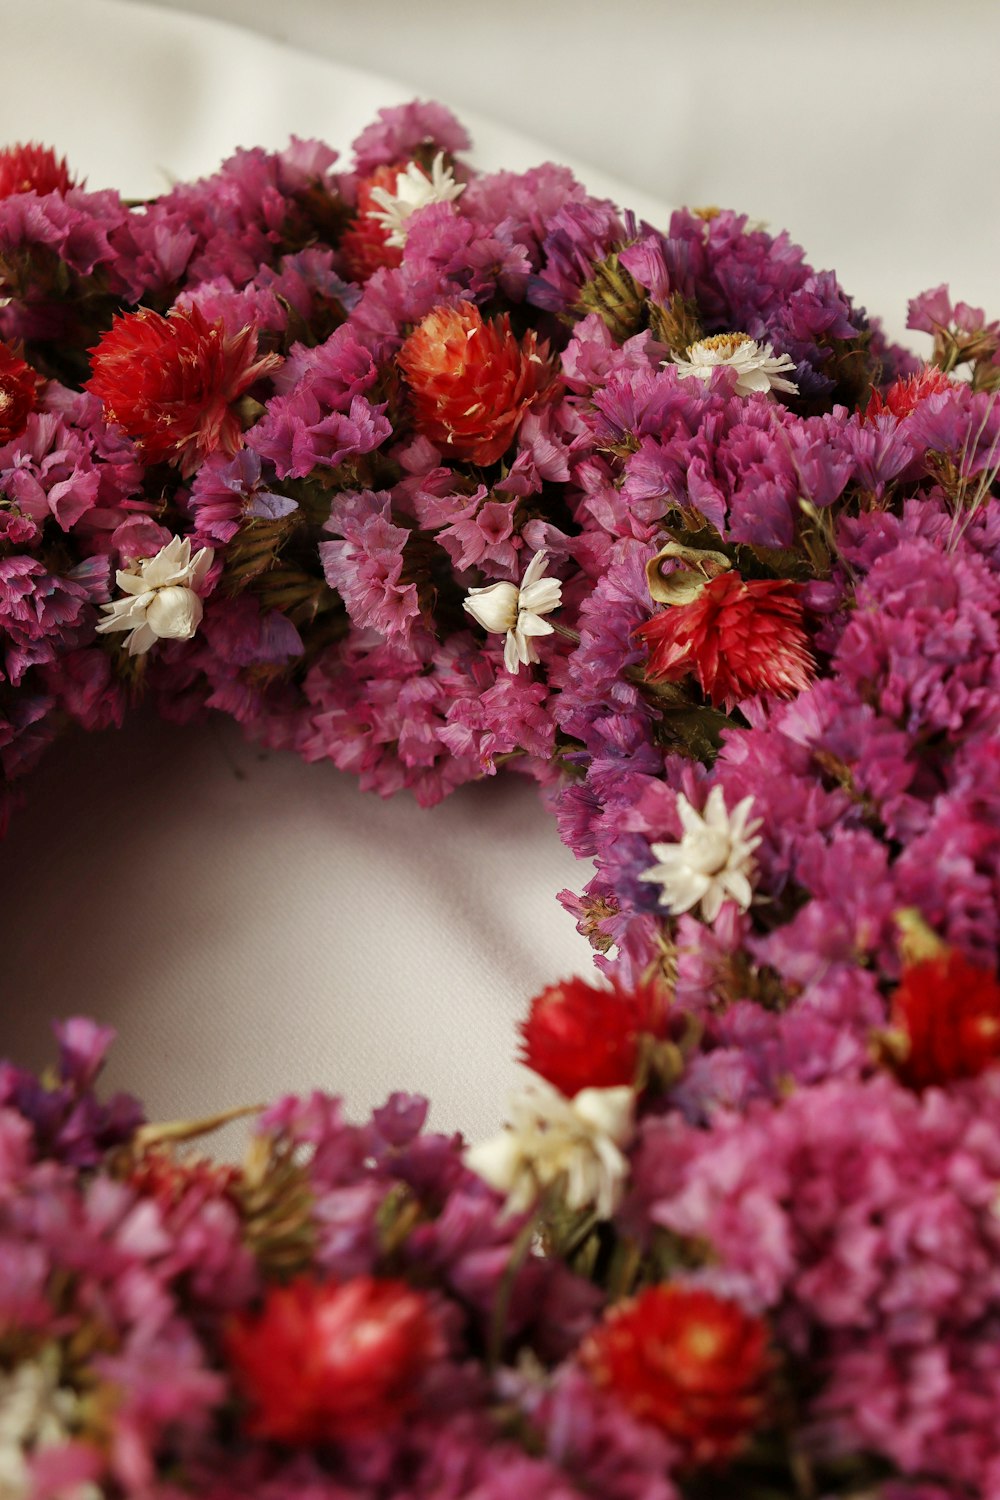 a close up of a wreath made of flowers